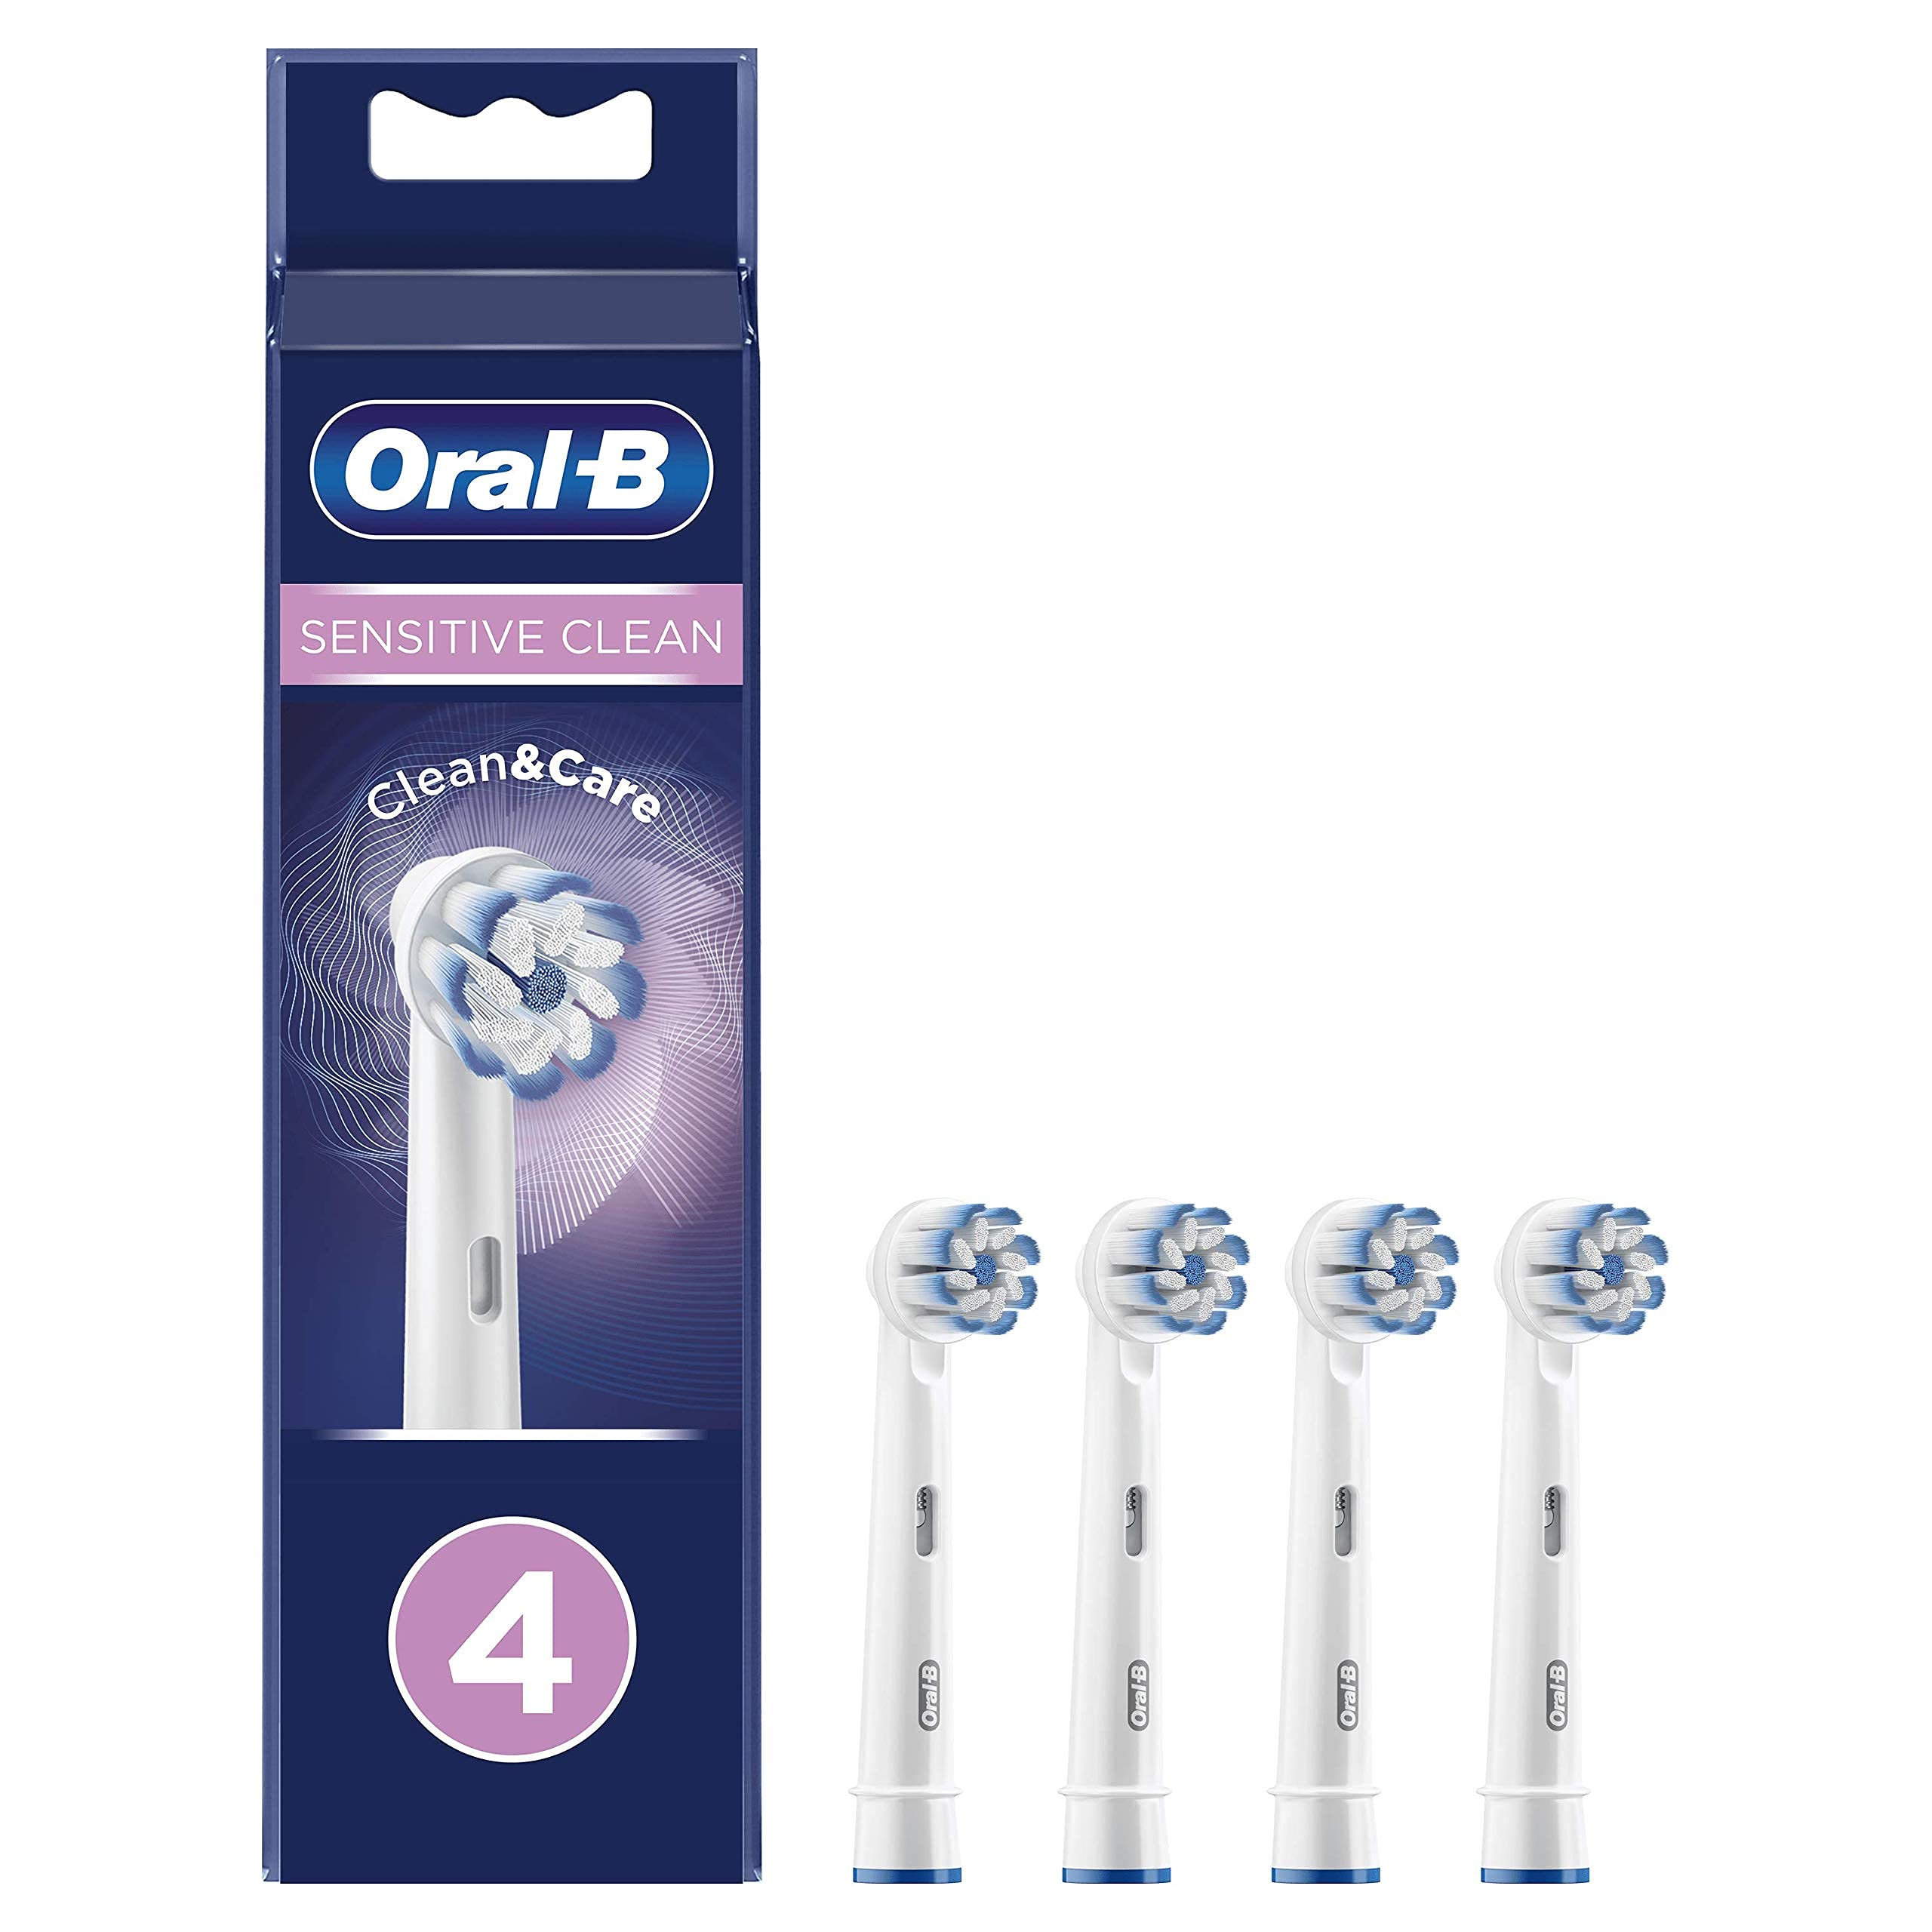 Oral-B Sensitive Clean Electric Toothbrush Head with Clean & Care Technology, Extra Soft Bristles for Gentle Plaque Removal, Pack of 4, White